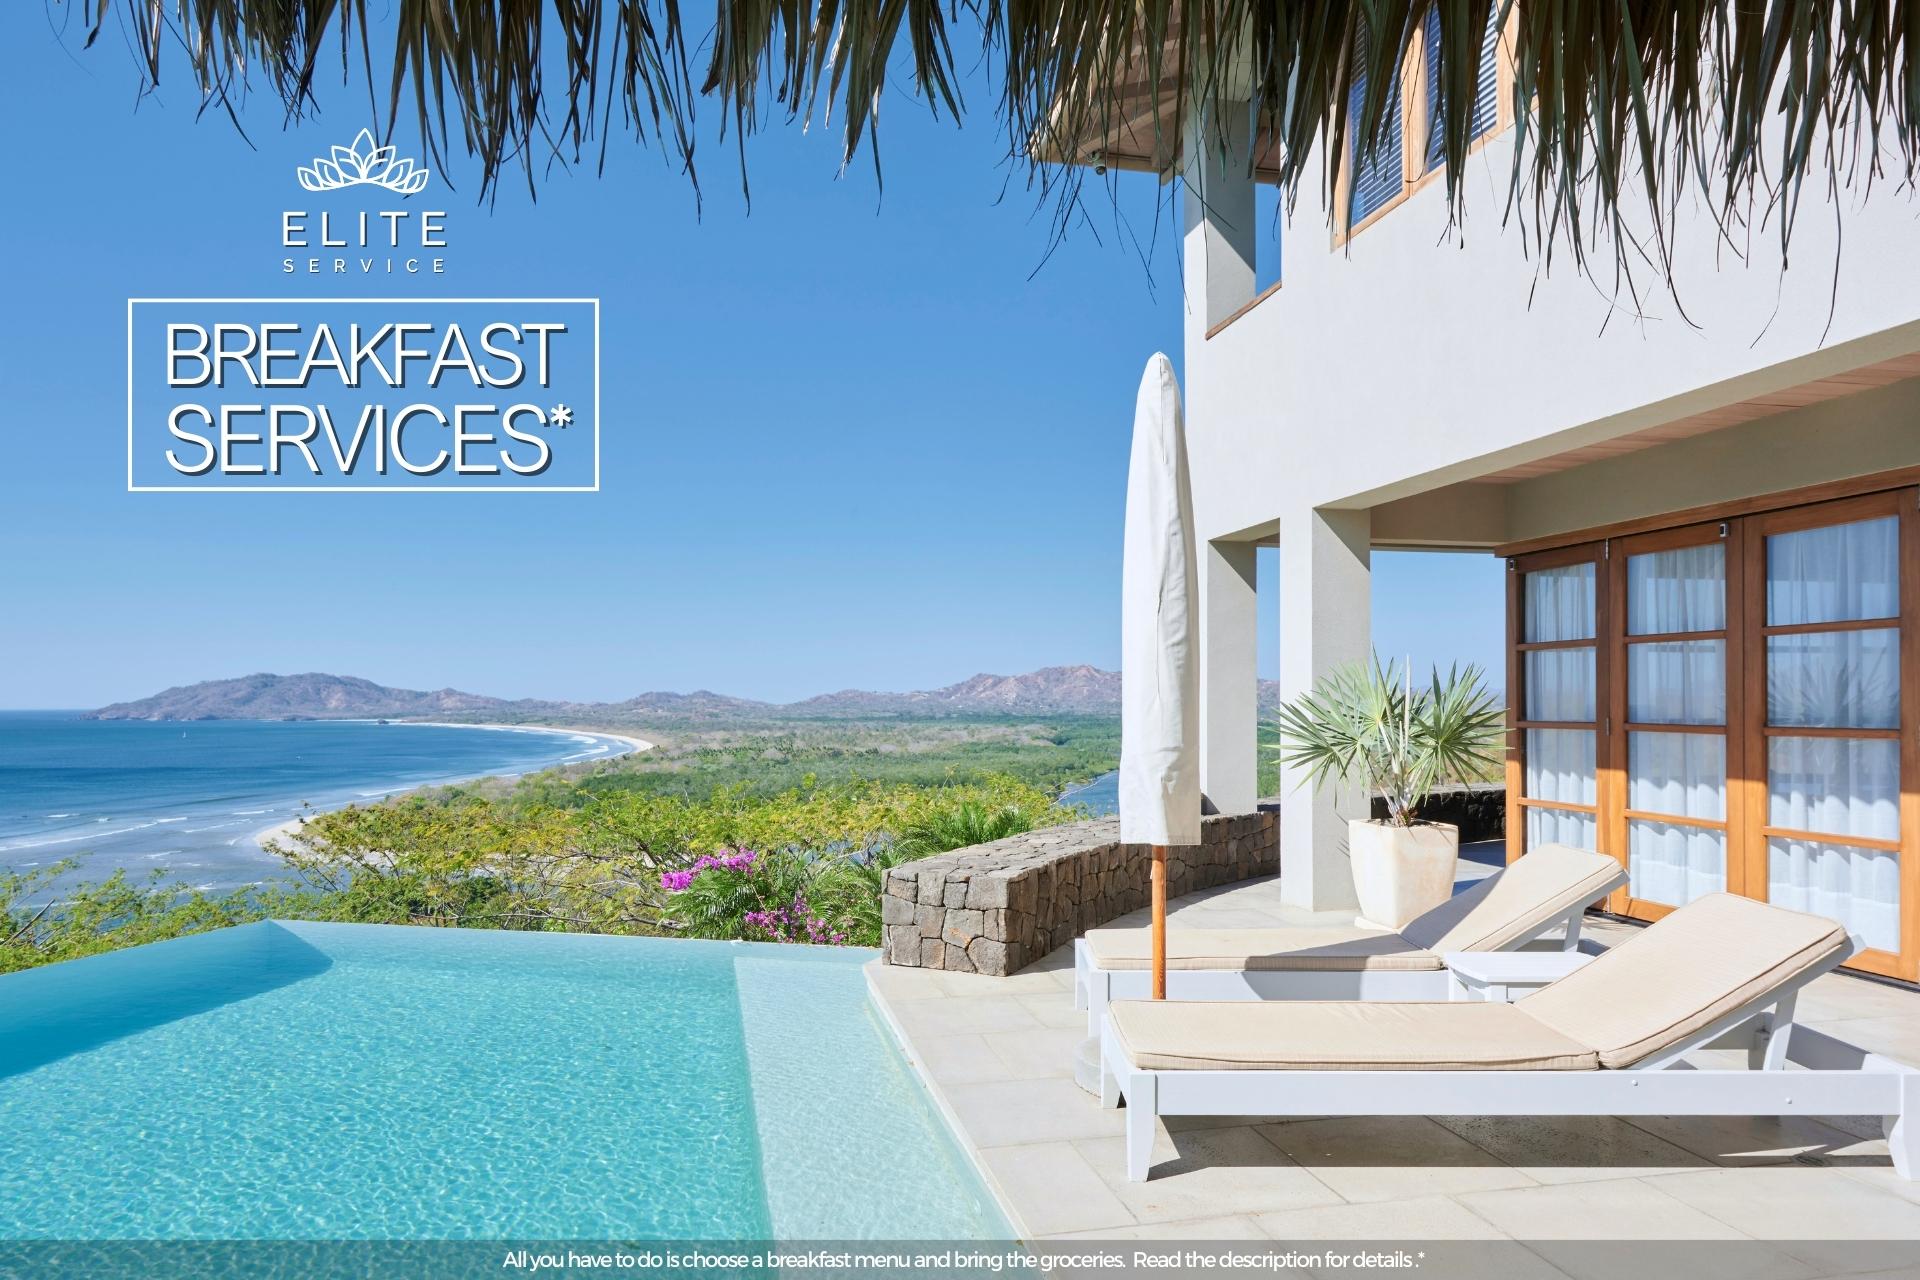 Welcome to Villa Royal Where Luxury Meets Serenity with Our Exclusive Elite Service!